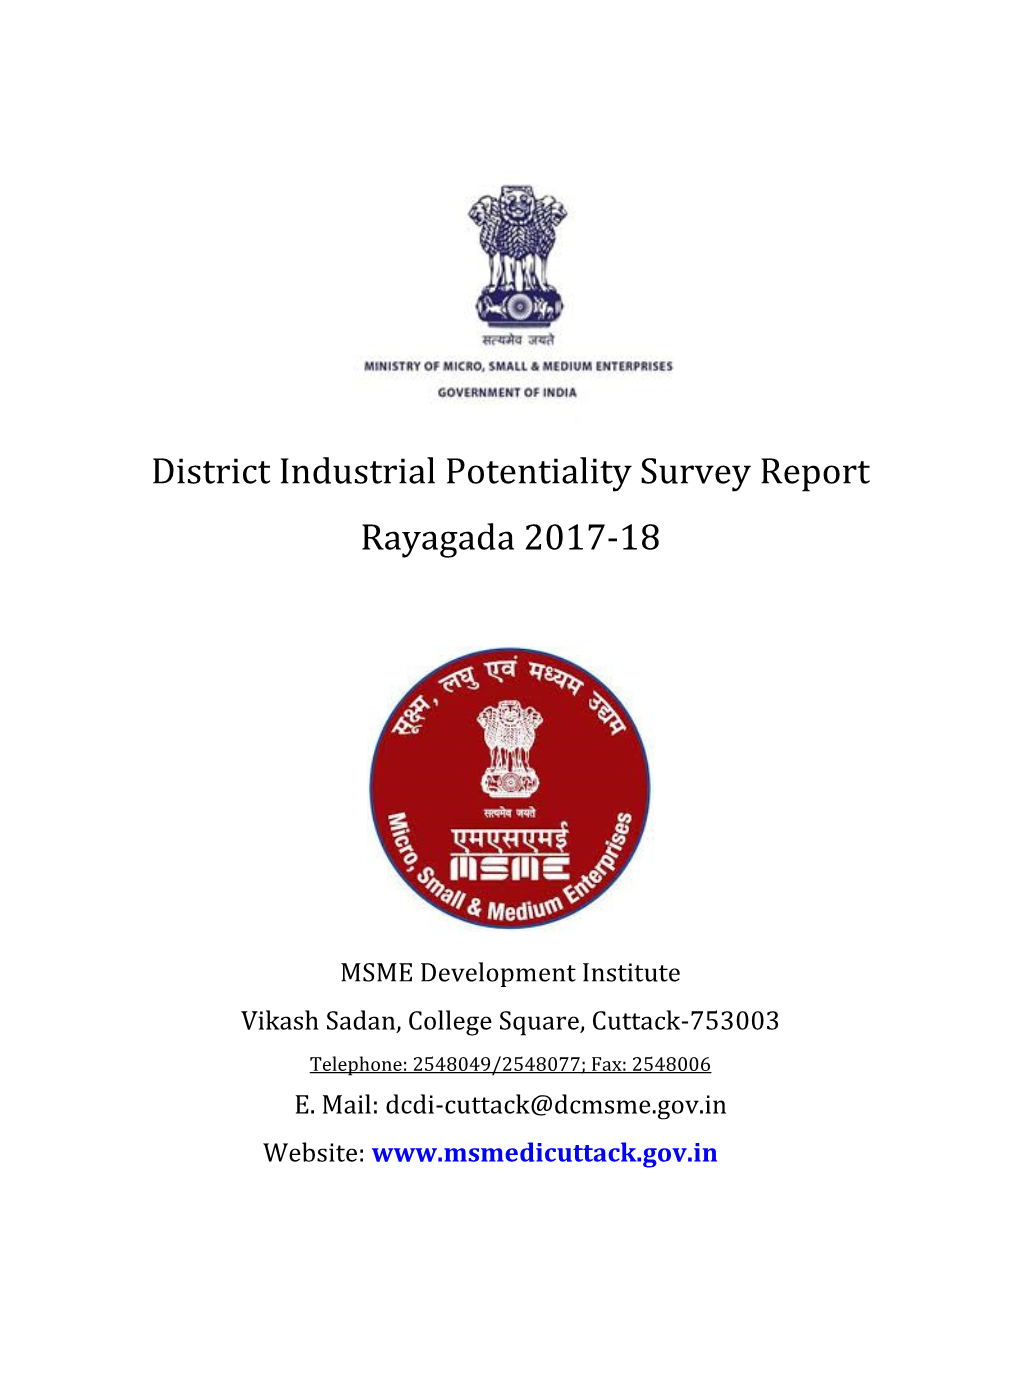 District Industrial Potentiality Survey Report Rayagada 2017-18